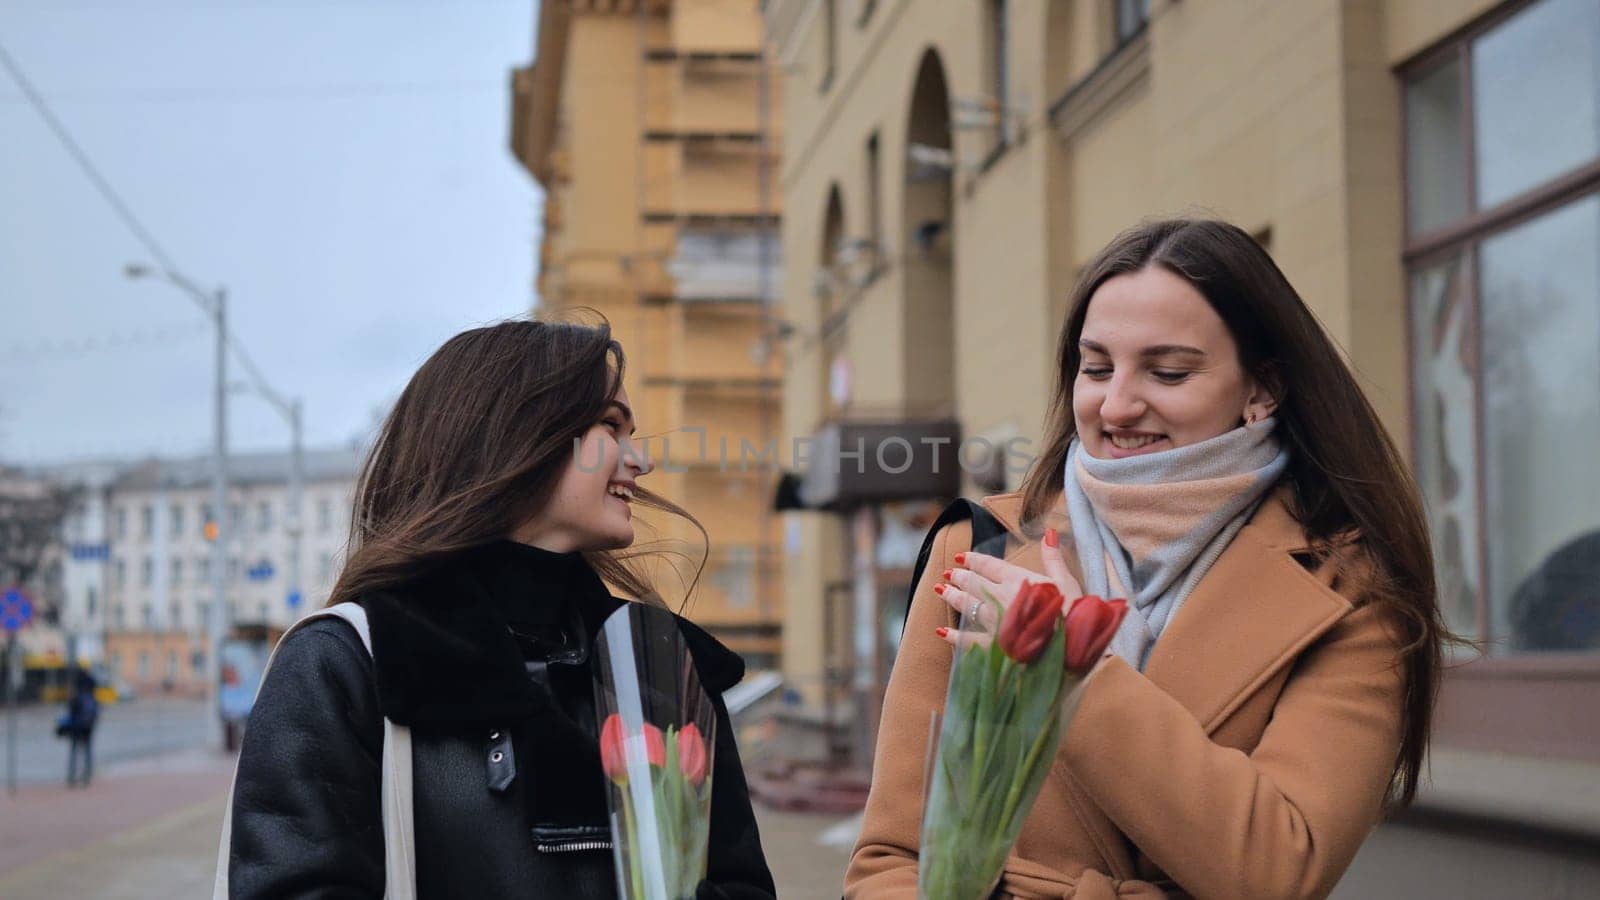 Two young girls, friends with flowers in their hands, walk along a city street on a cloudy spring day.